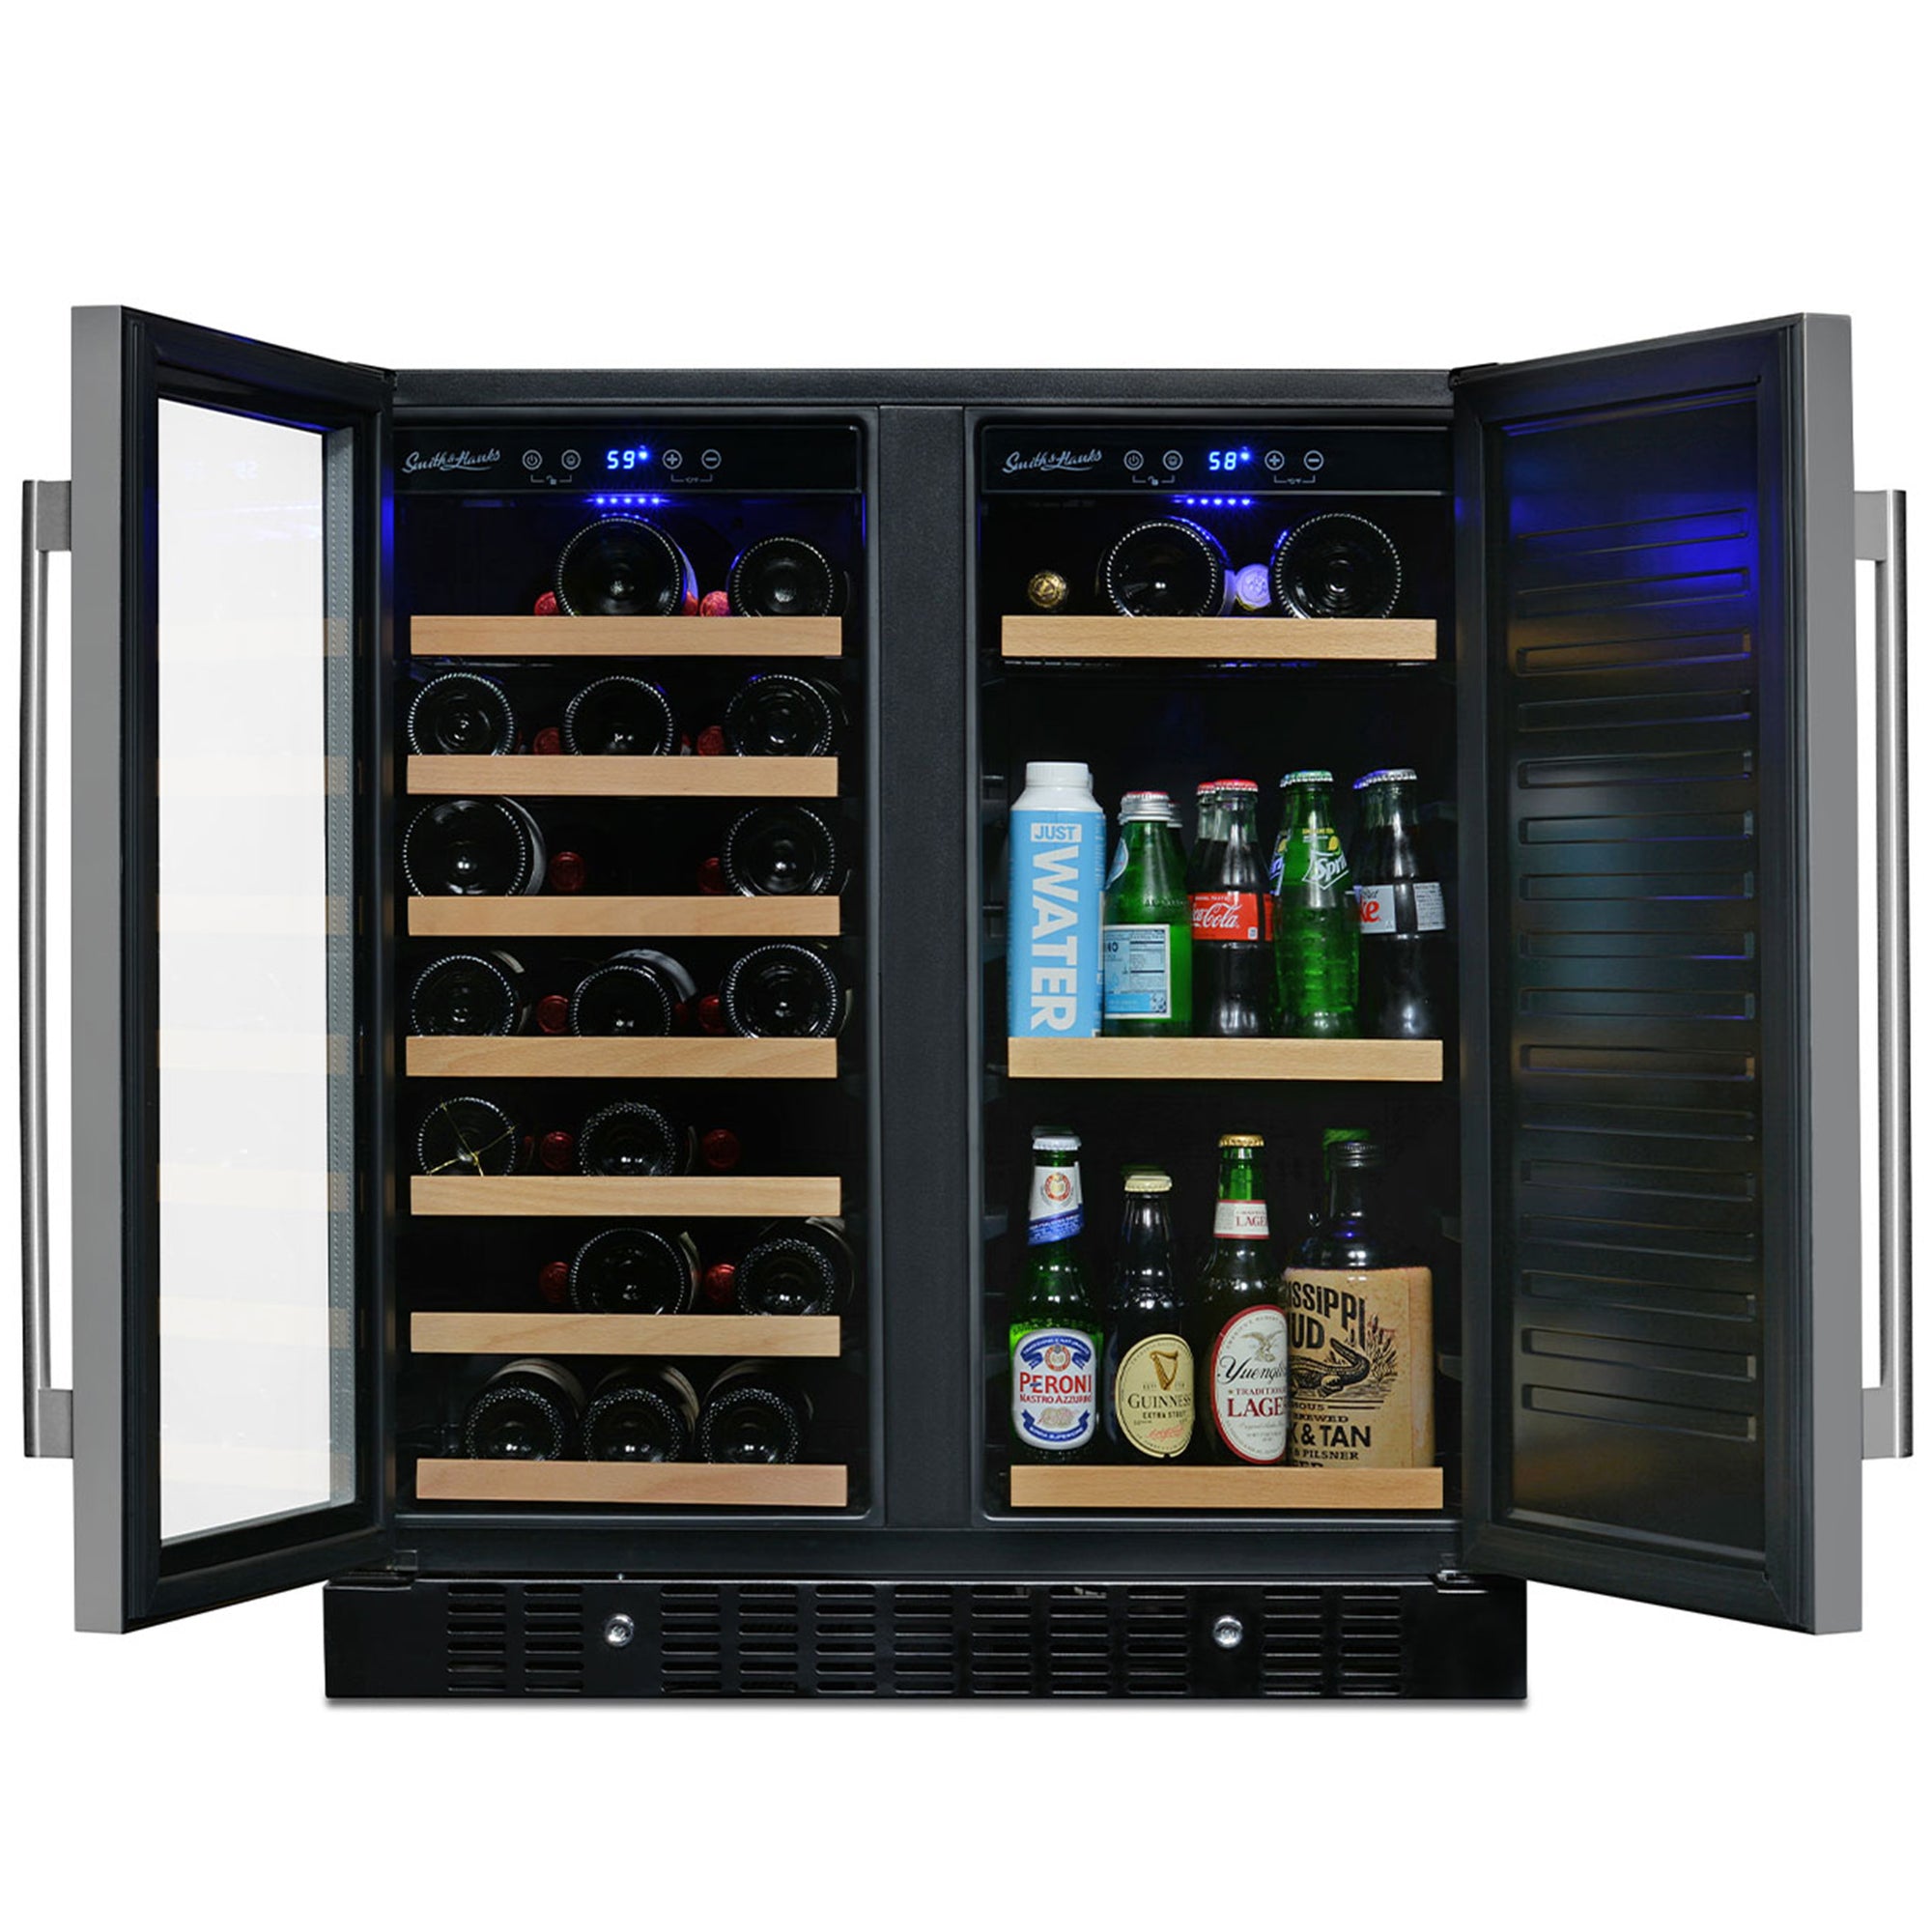 Stainless Steel Wine and Beverage Cooler